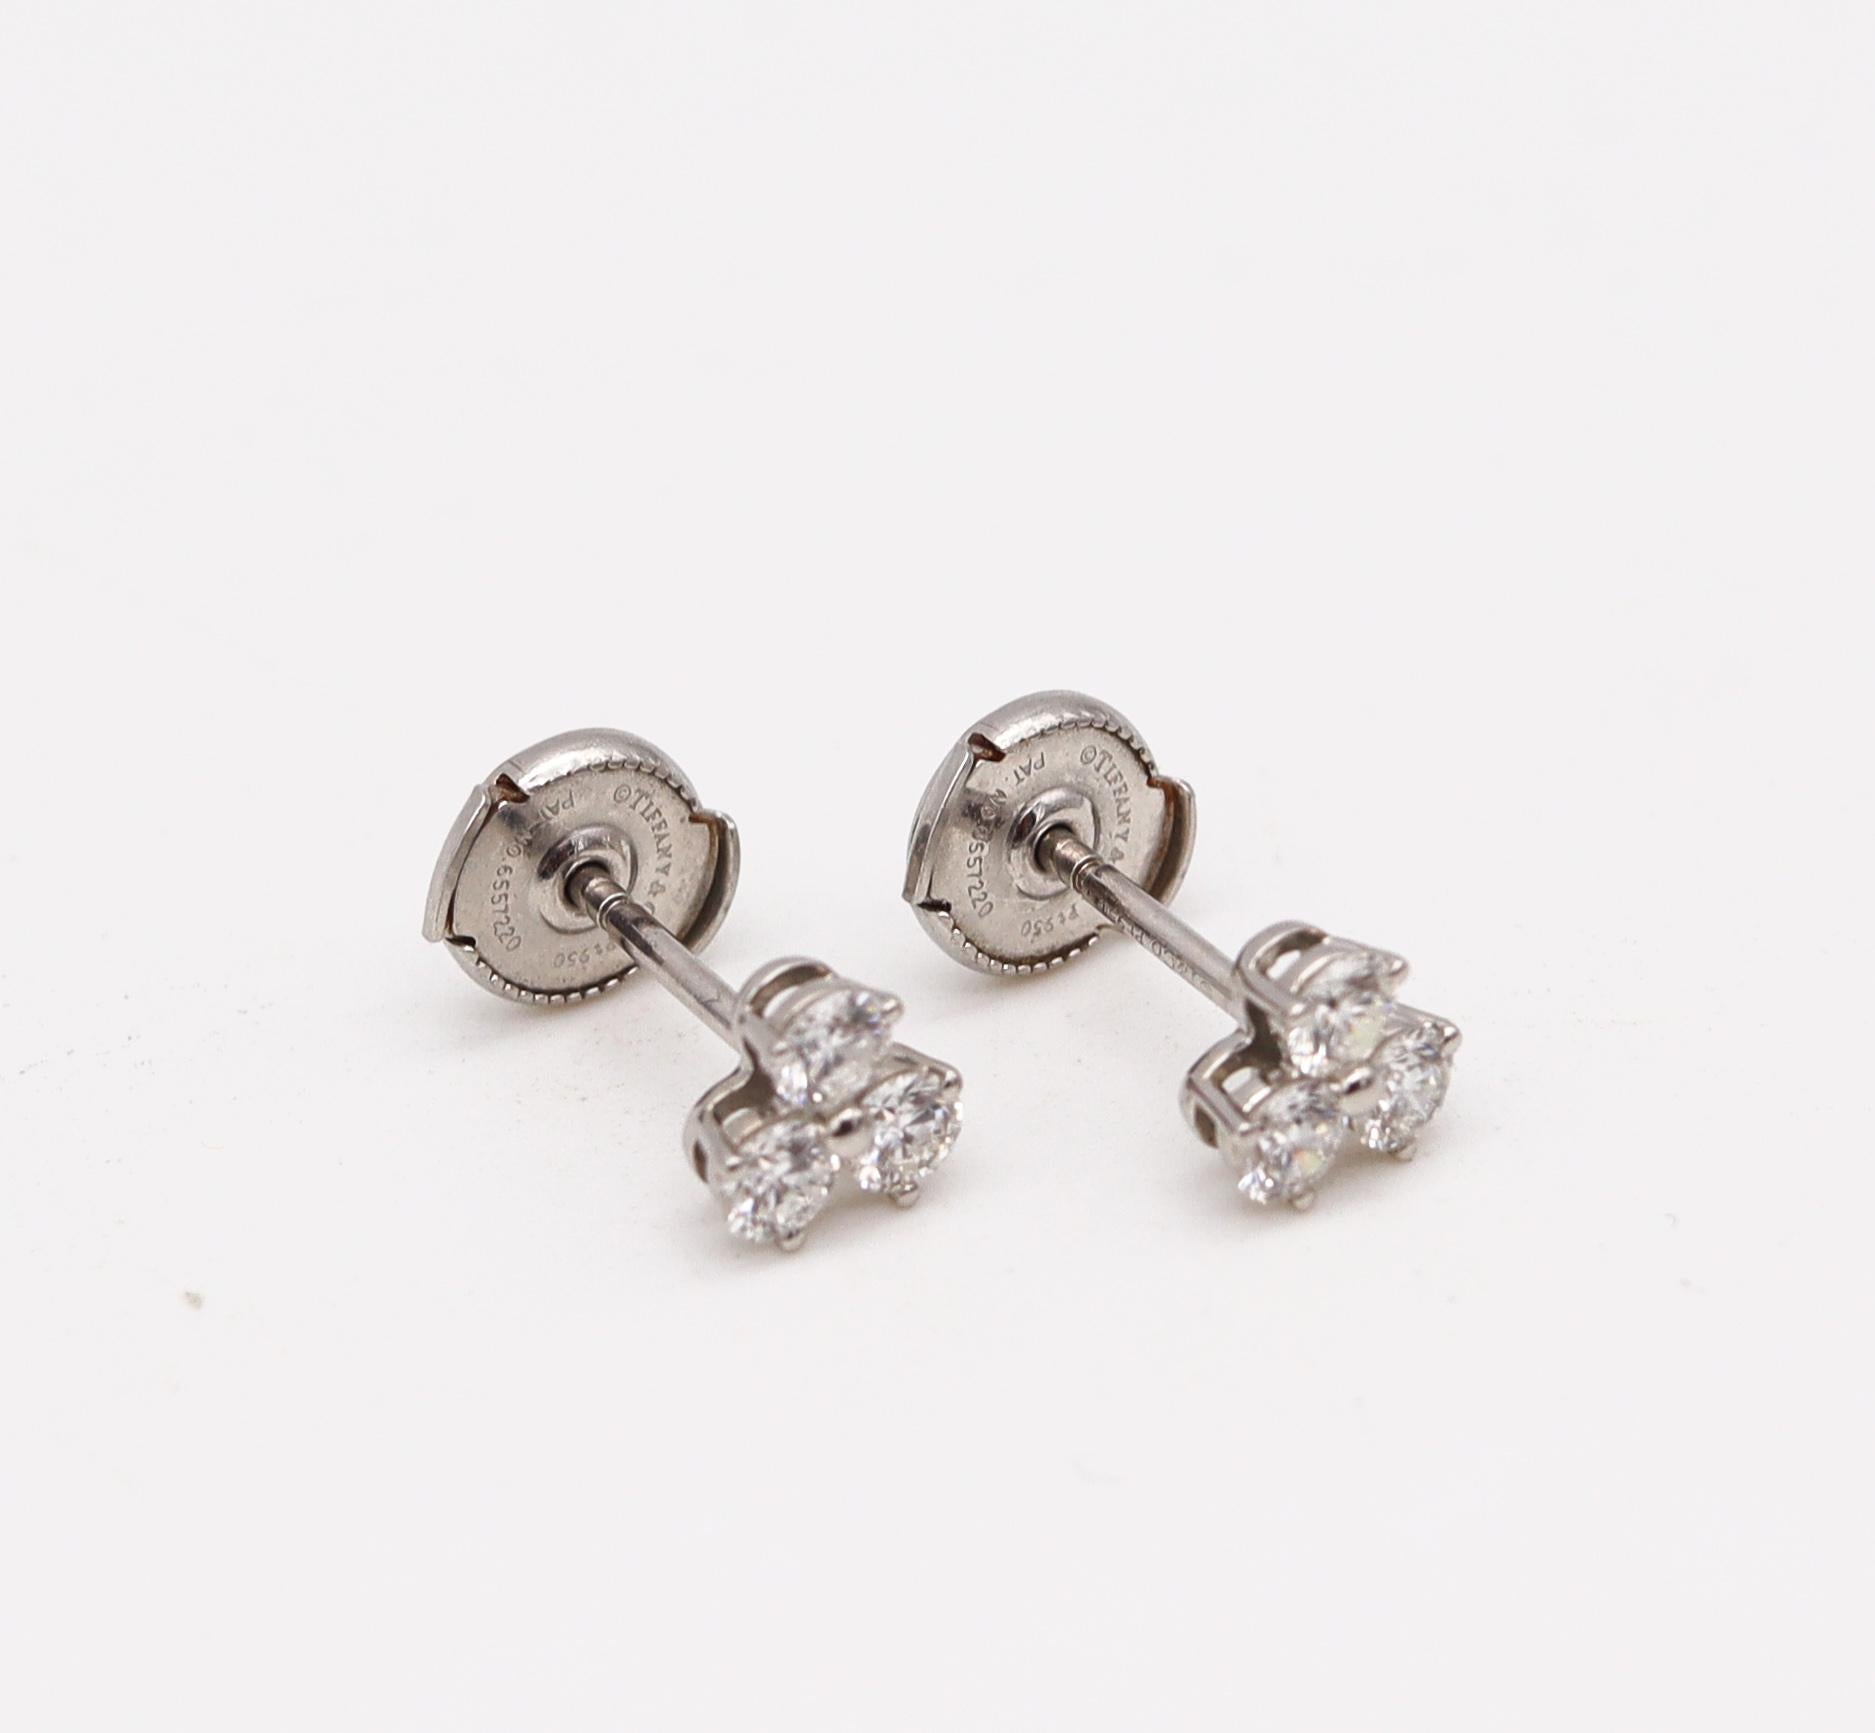 Brilliant Cut Tiffany & Co. Three Stones Earrings Studs In Solid Platinum With 6 VVS Diamonds